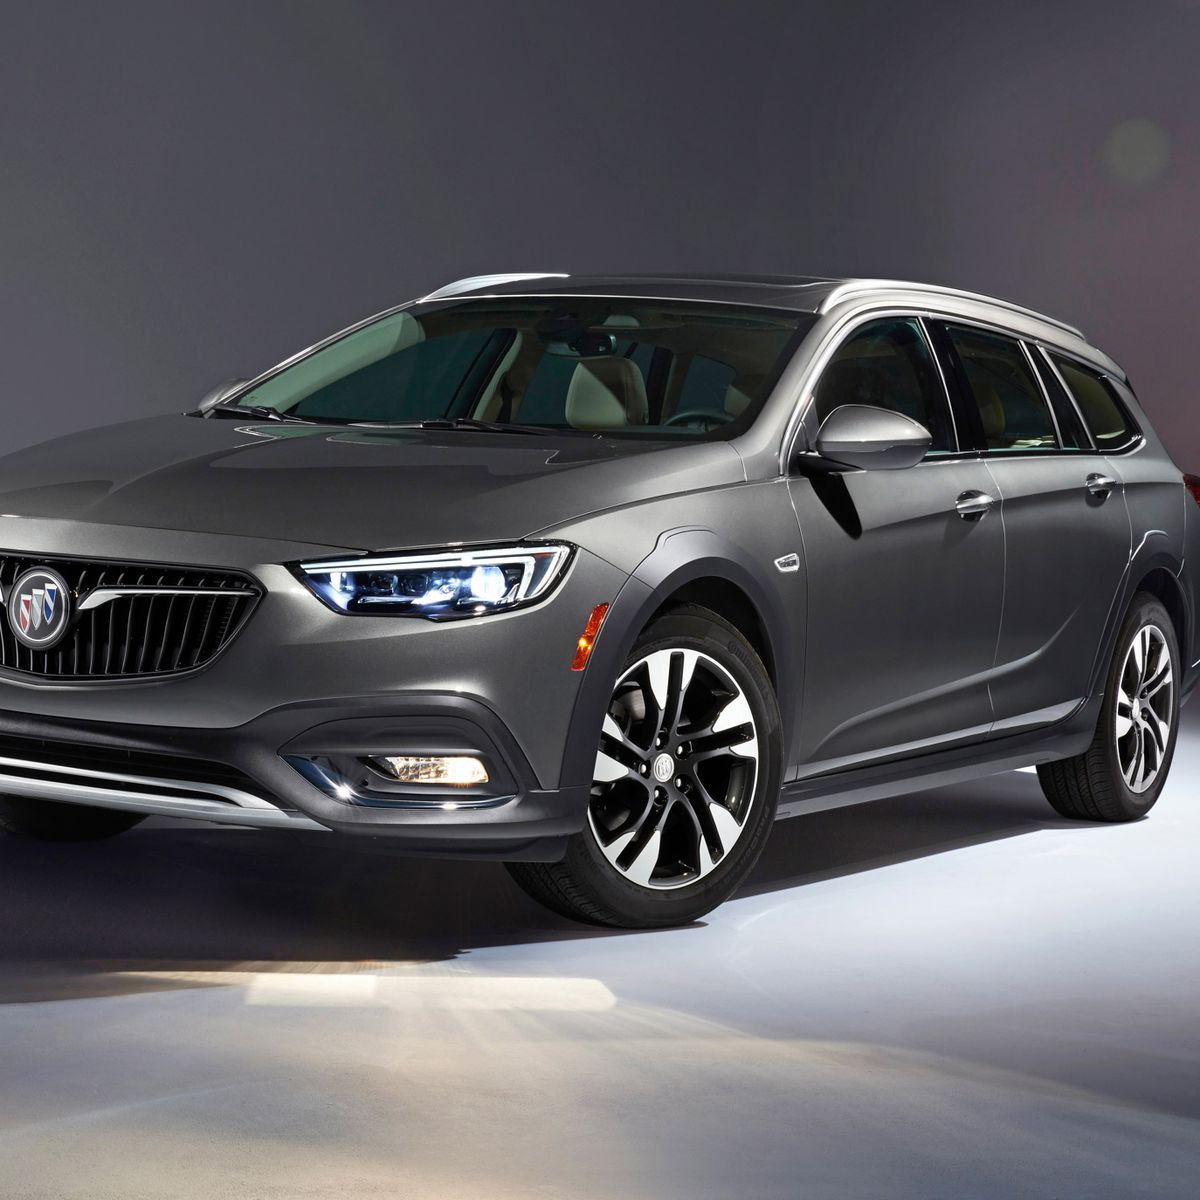 2018 Buick Regal TourX Dissected | Feature | Car and Driver